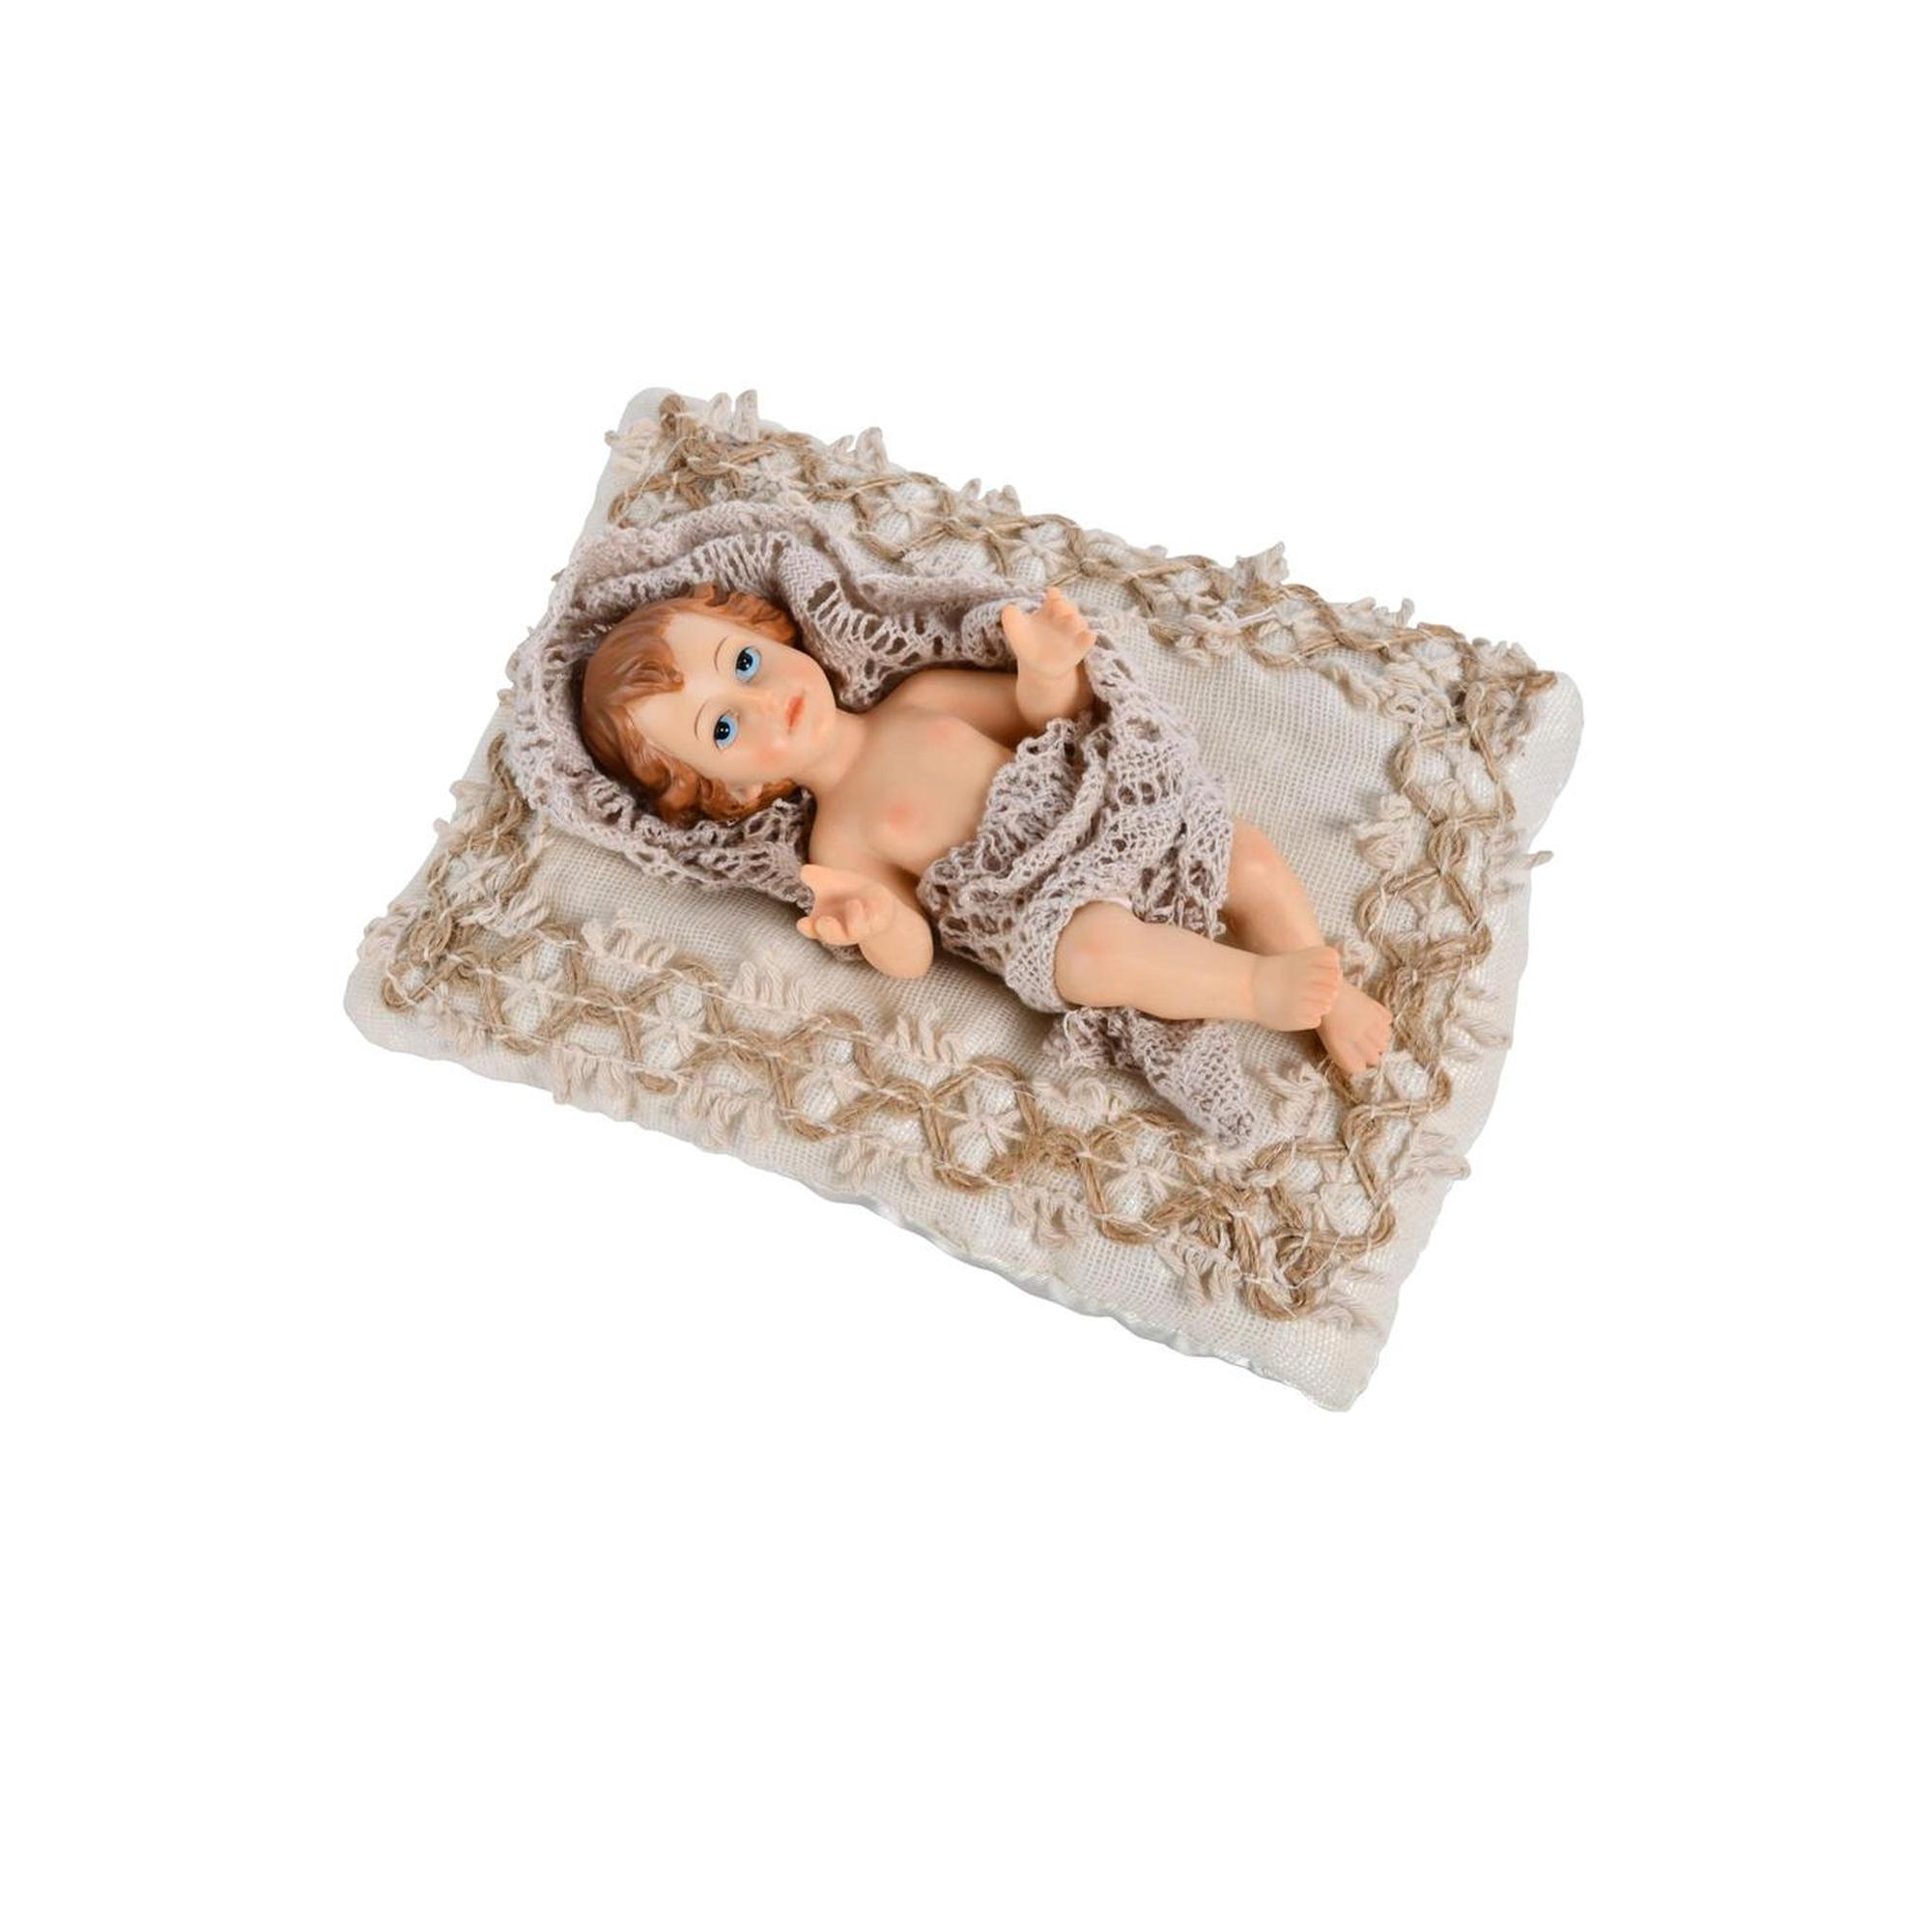 FIG BABY JESUS 7 inches - 100-4900195